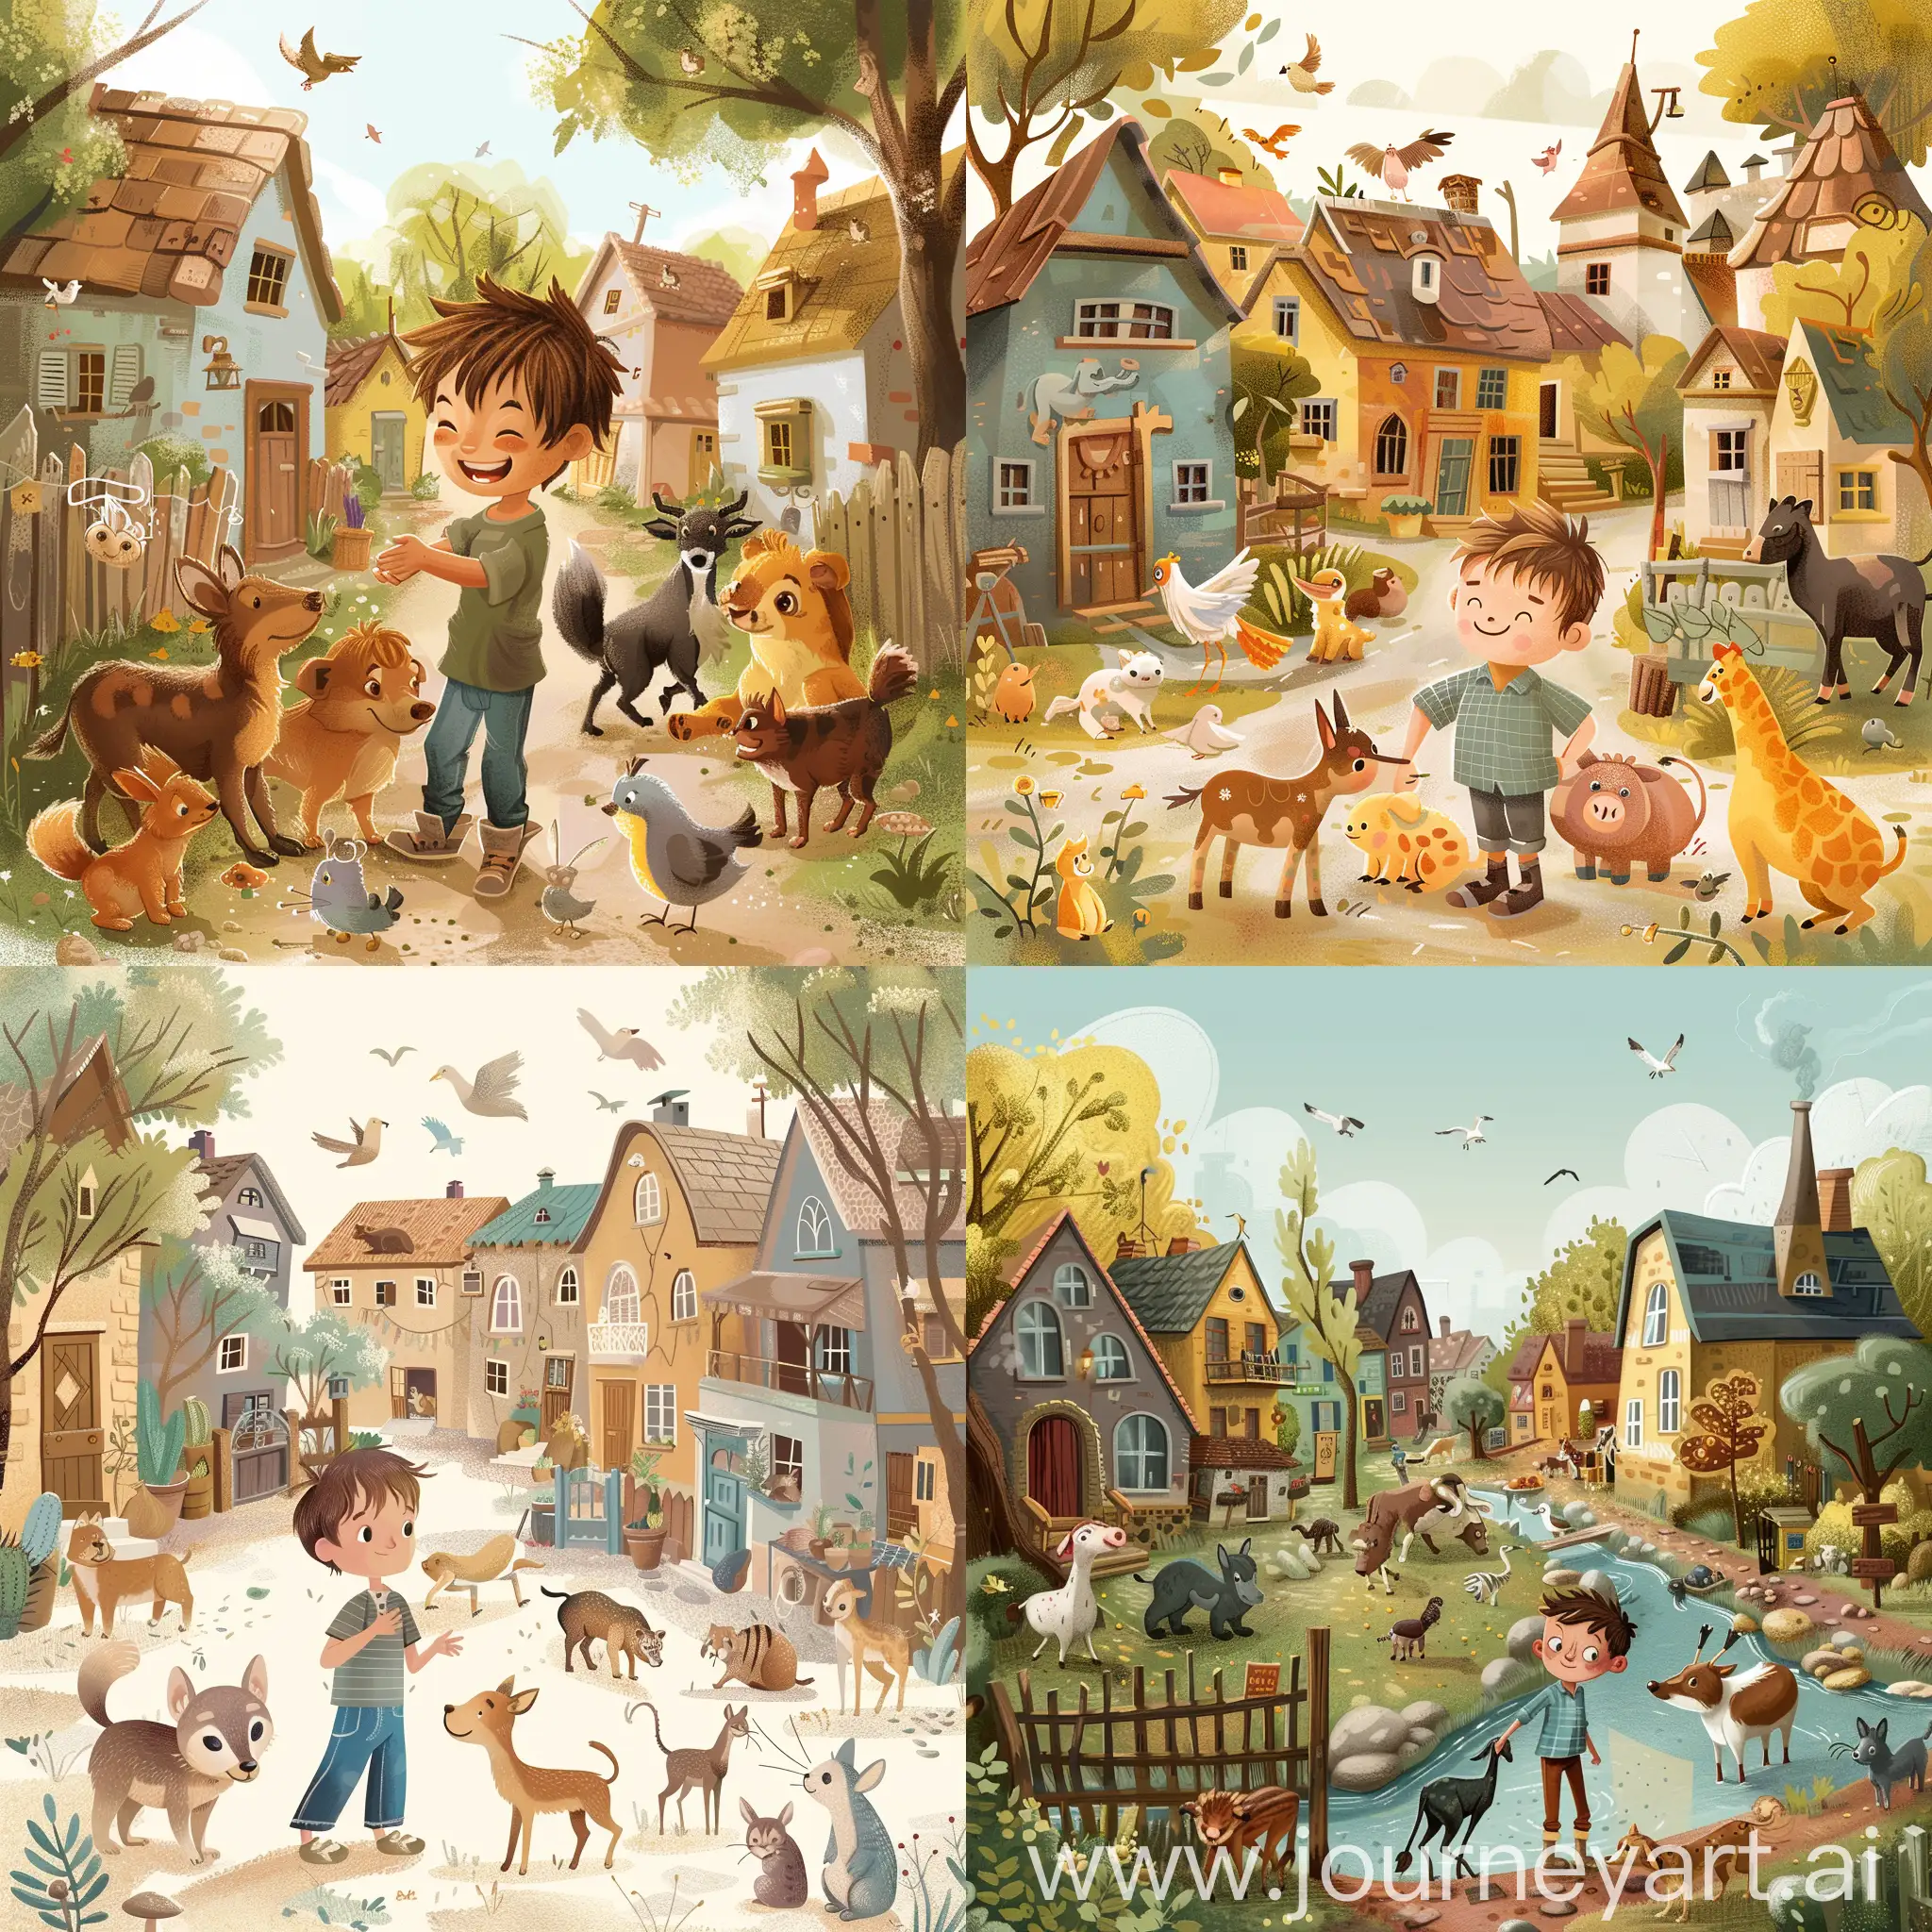 A boy Living with animals in a town, a childrens book illustration style.